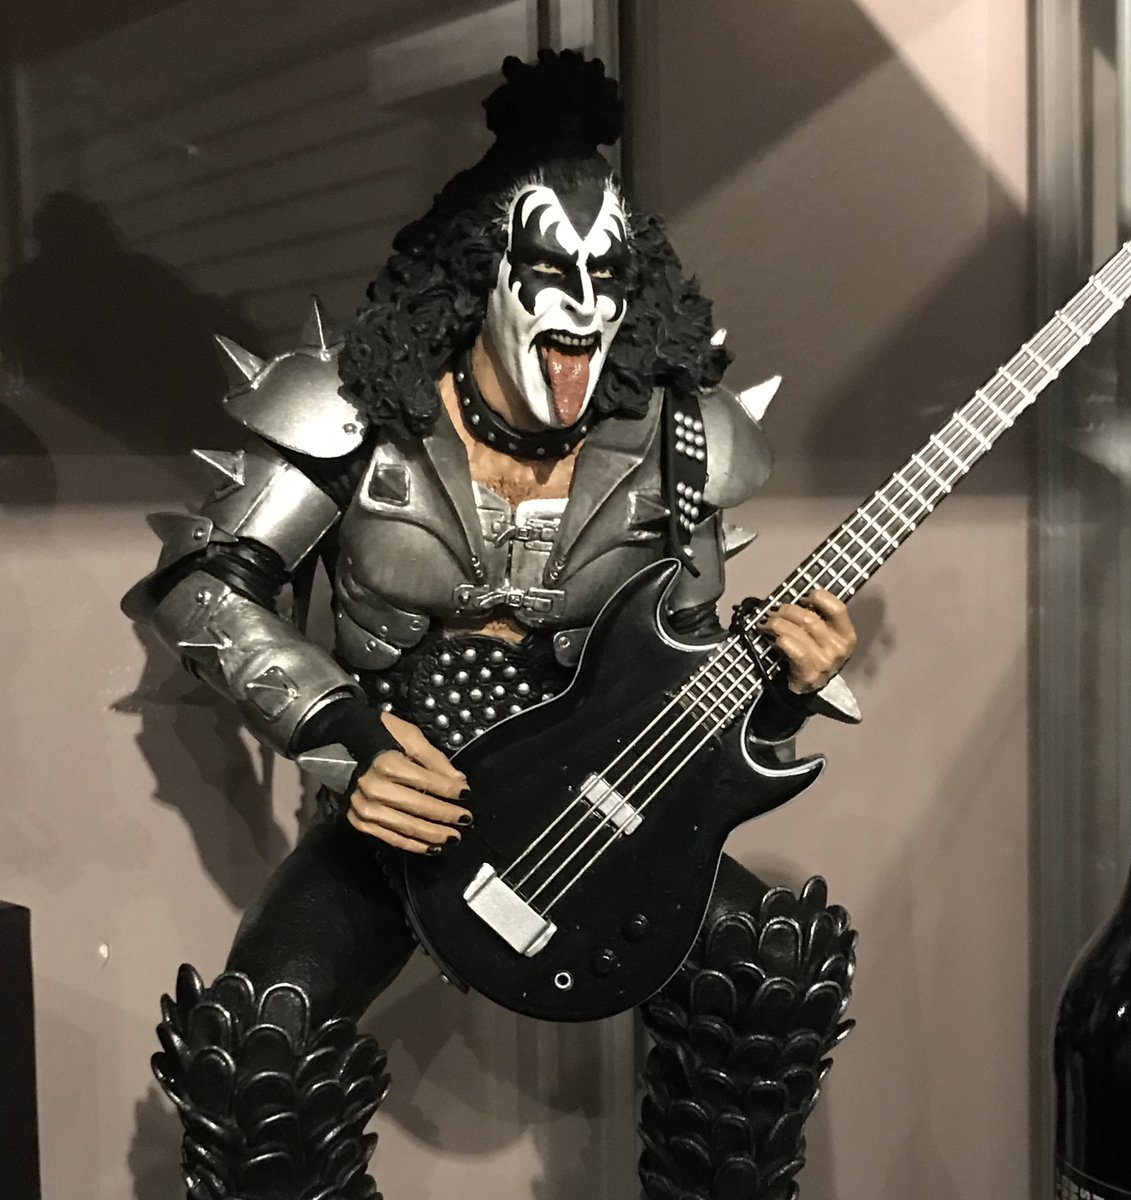 Hey Rockers! KISS Week Day 2 This is my Large 18” inch McFarlane KISS Destroyer figure. Spencer gifts exclusive. Its HUGE!! Have a rockin night my friends…